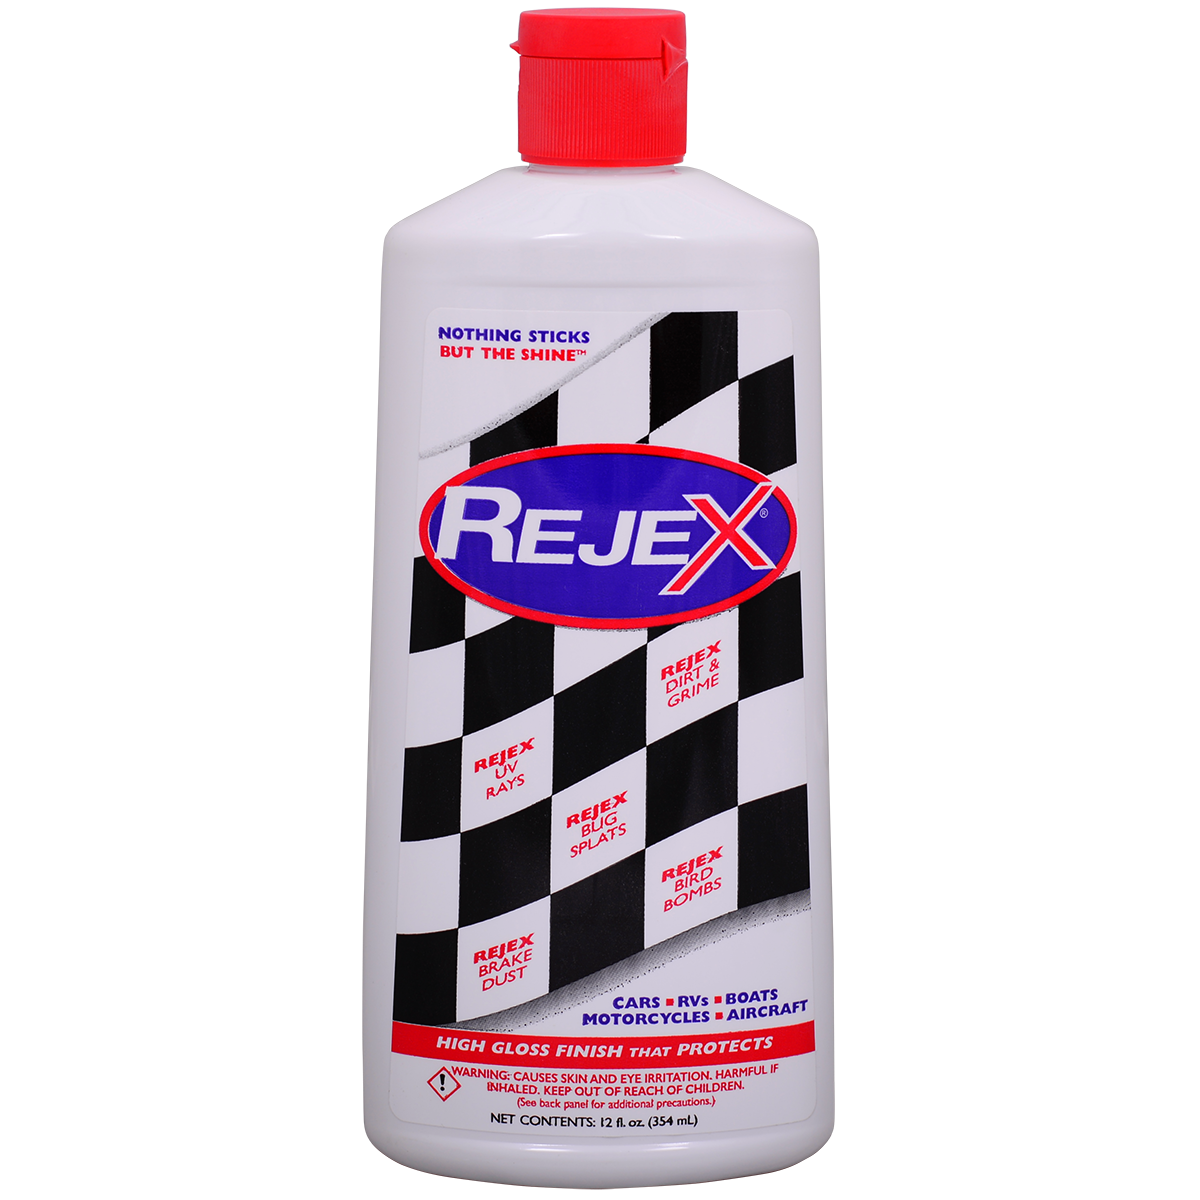 RejeX high gloss finish that protects